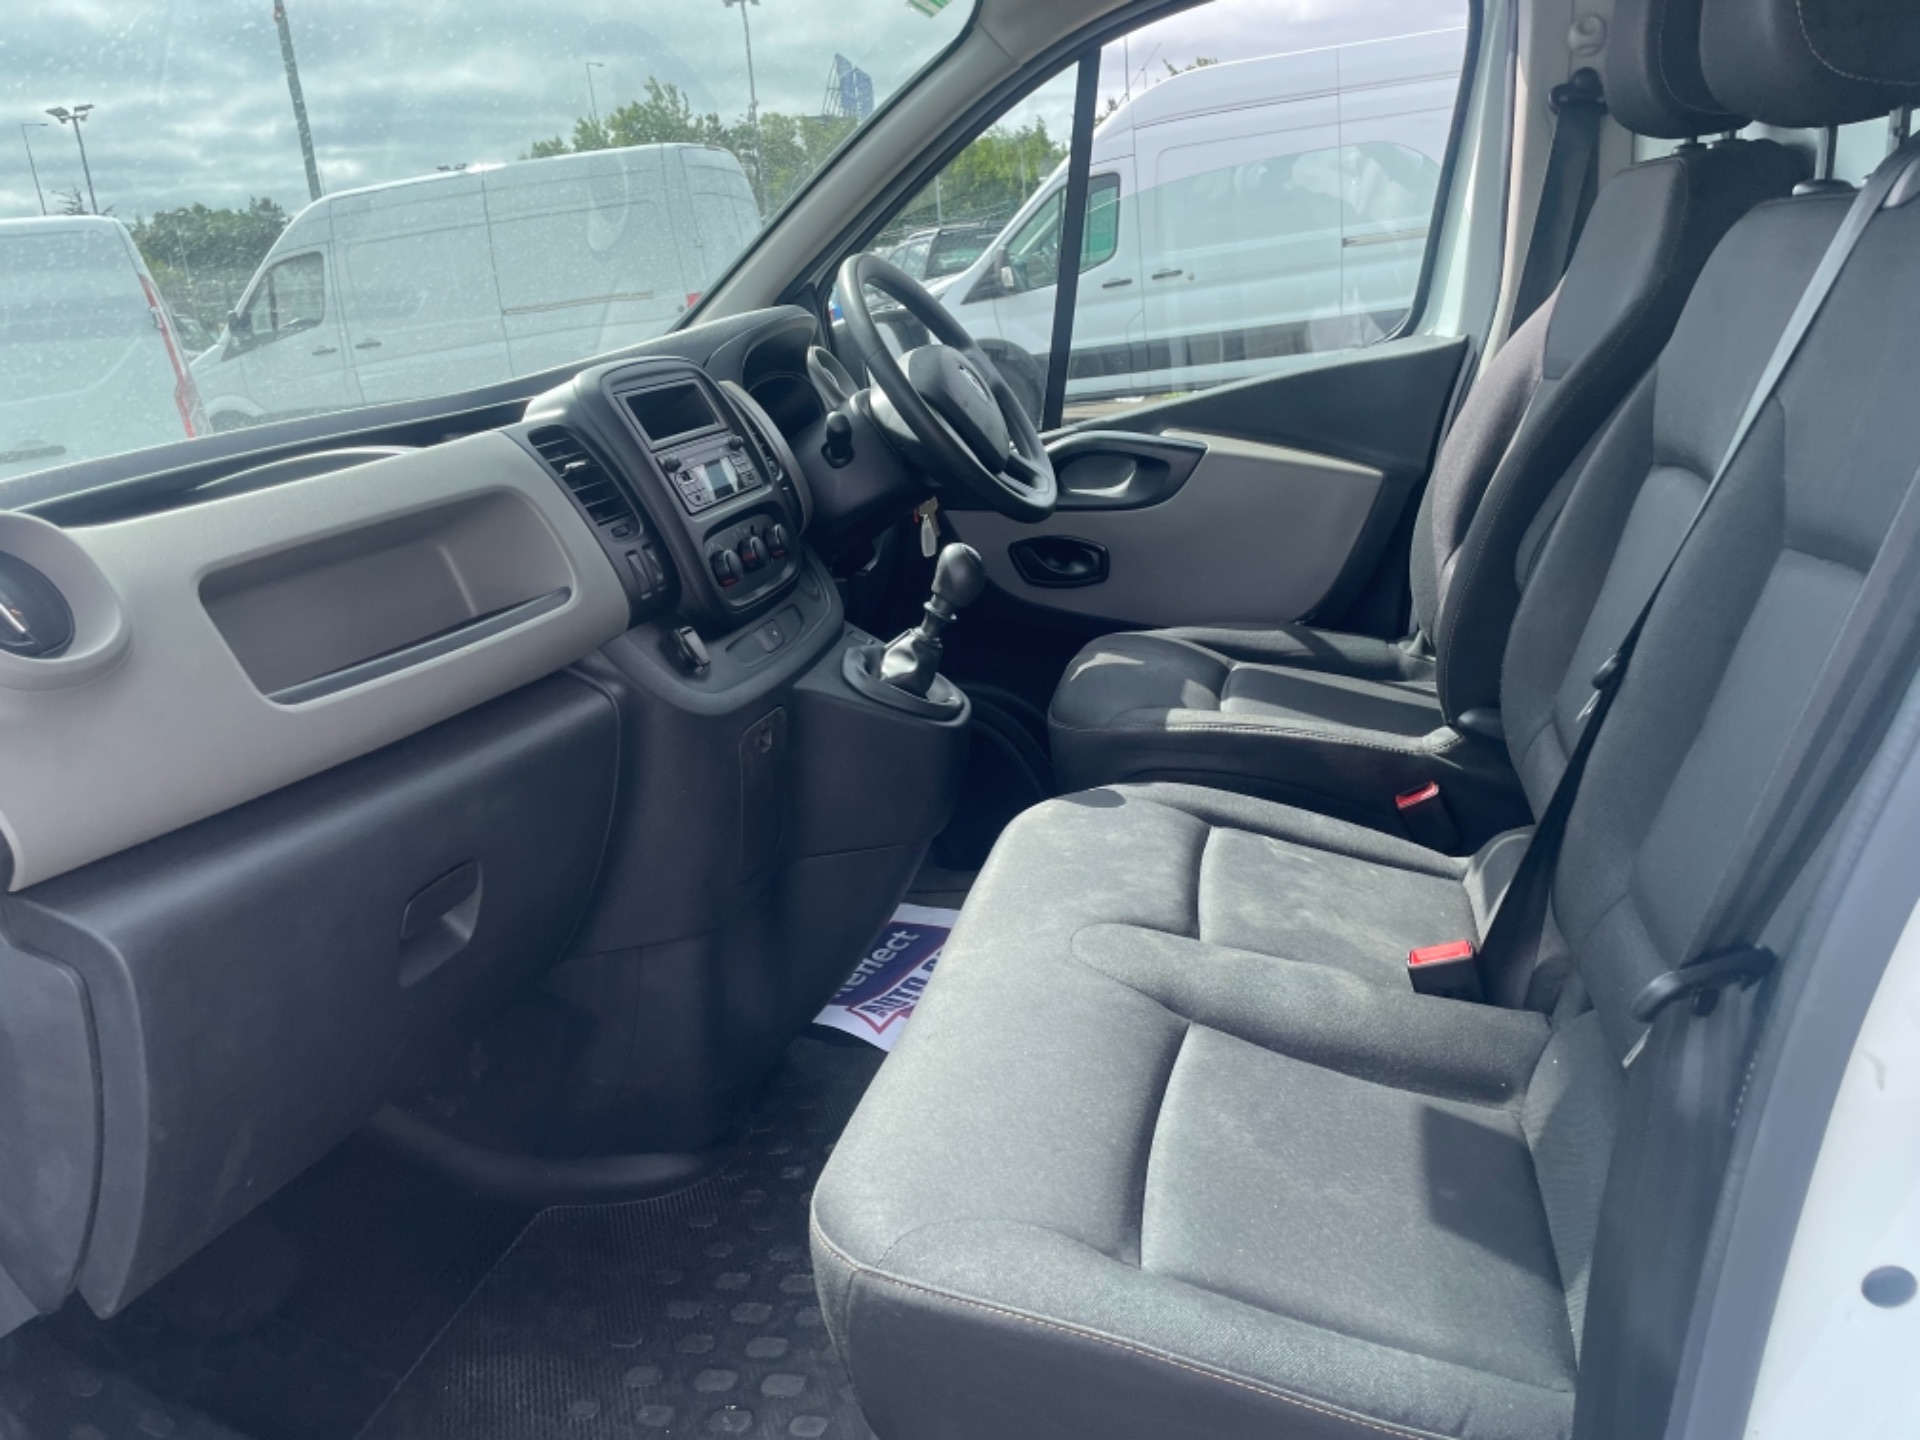 2019 Renault Trafic LL29 DCI 120 Business (191D16447) Thumbnail 11